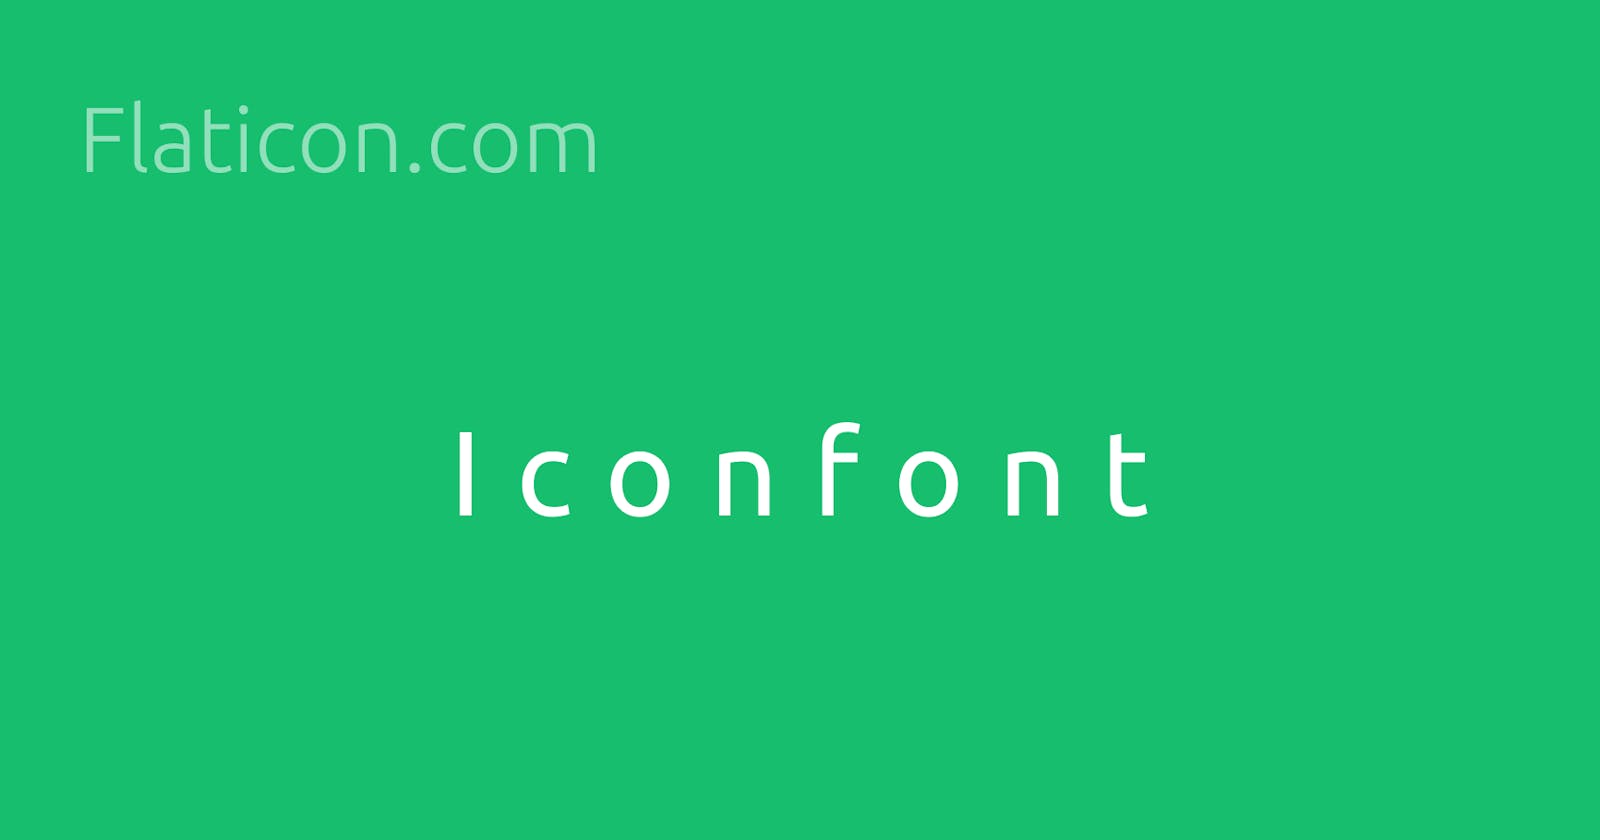 Introduction To Iconfonts On The Web- Flaticon.com